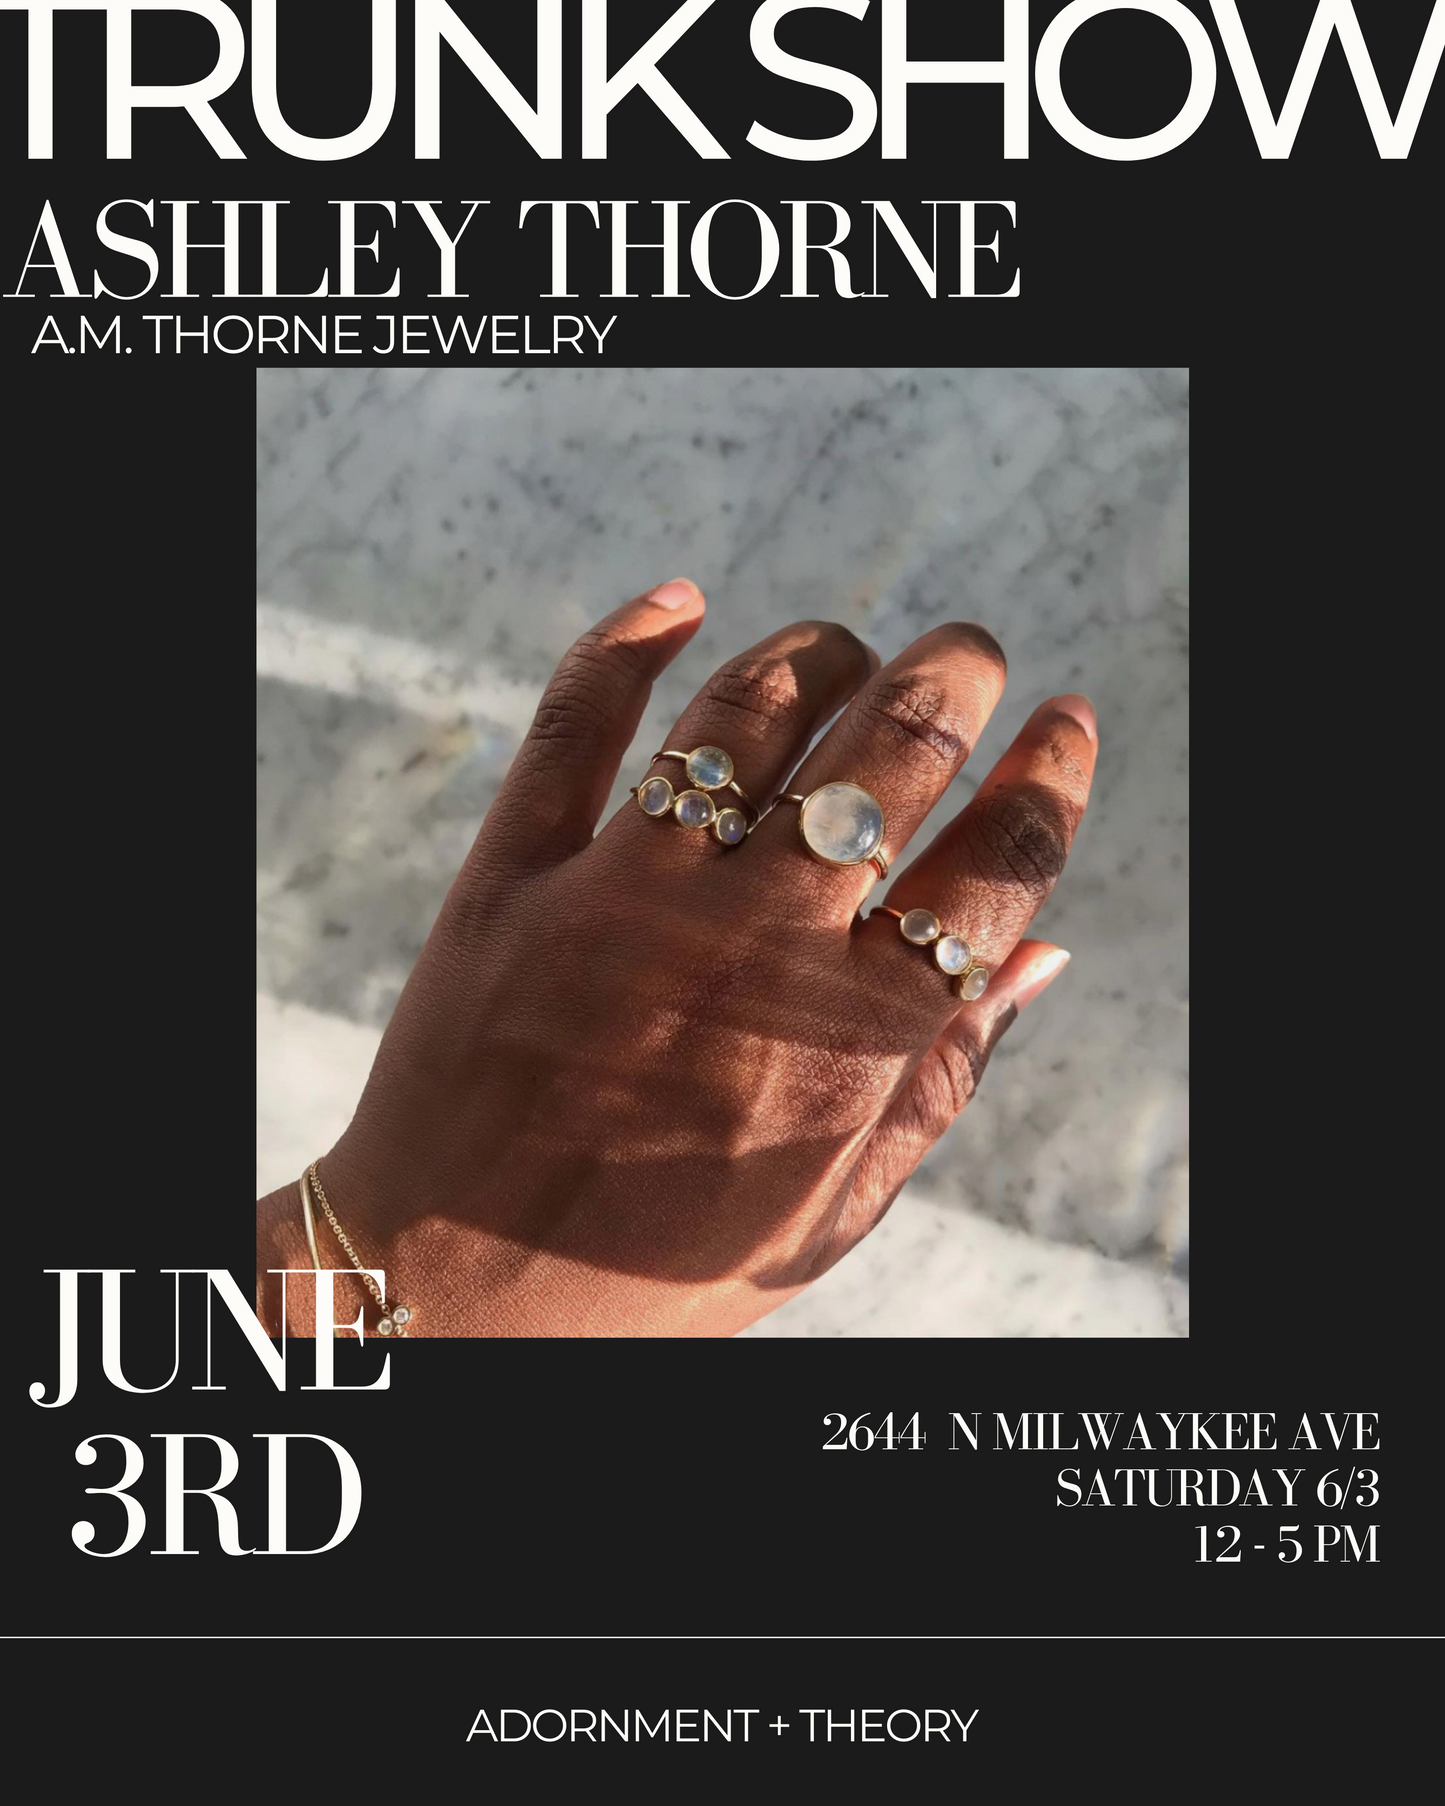 Trunk Show with A.M. Thorne